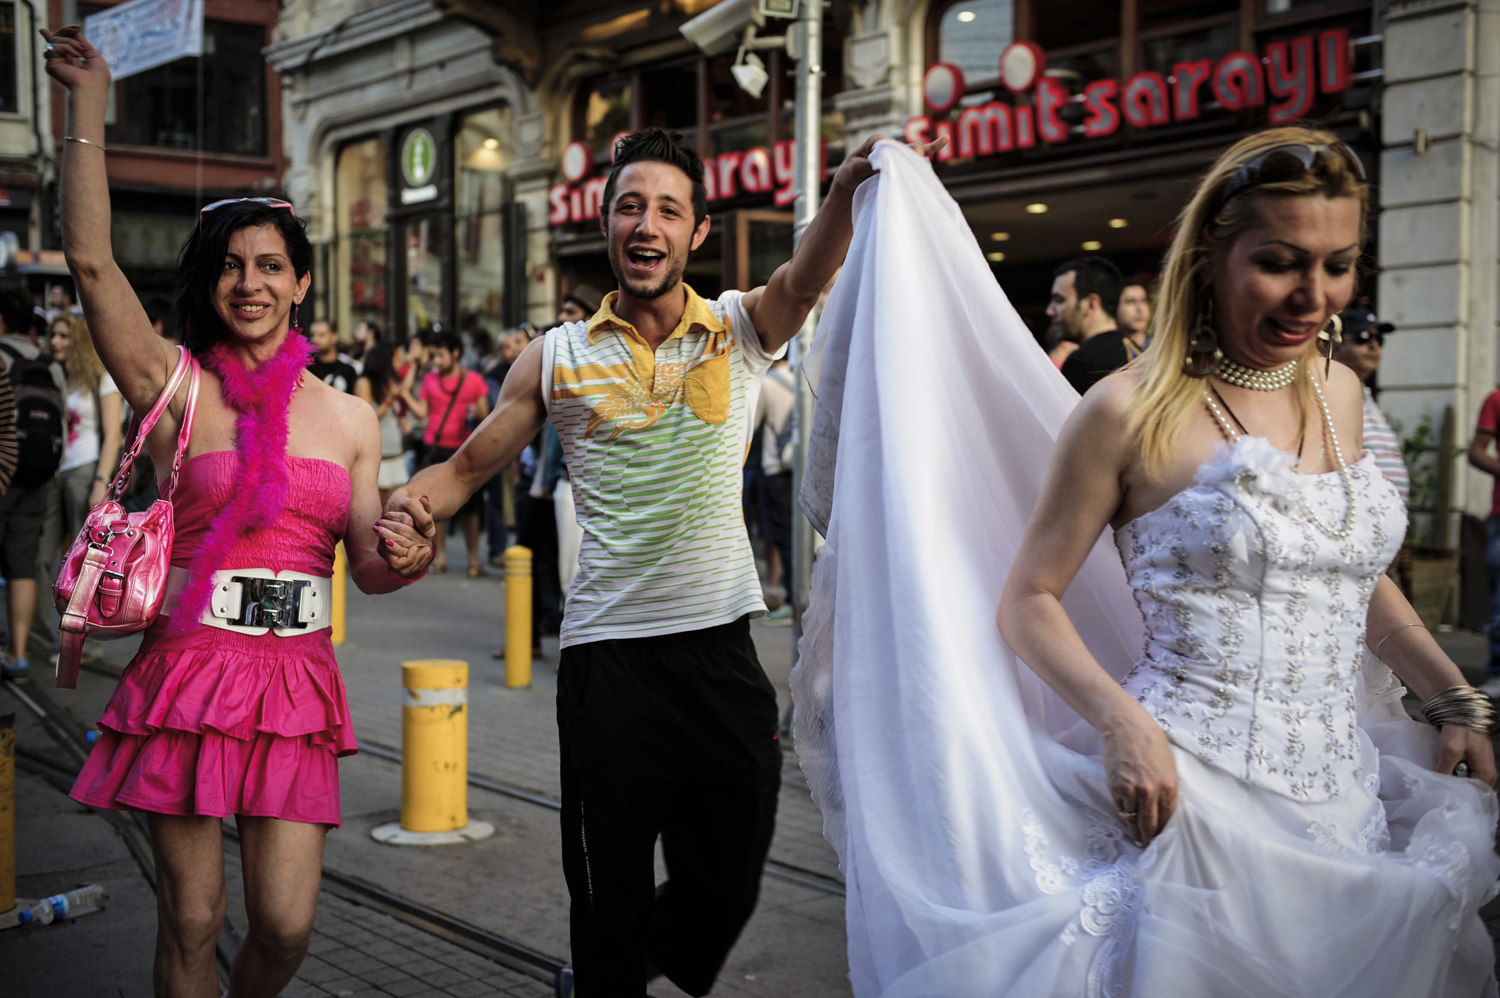  Celebrating Gay Pride day, a Transgendered couple stage a mock wedding in Istanbul Turkey. 